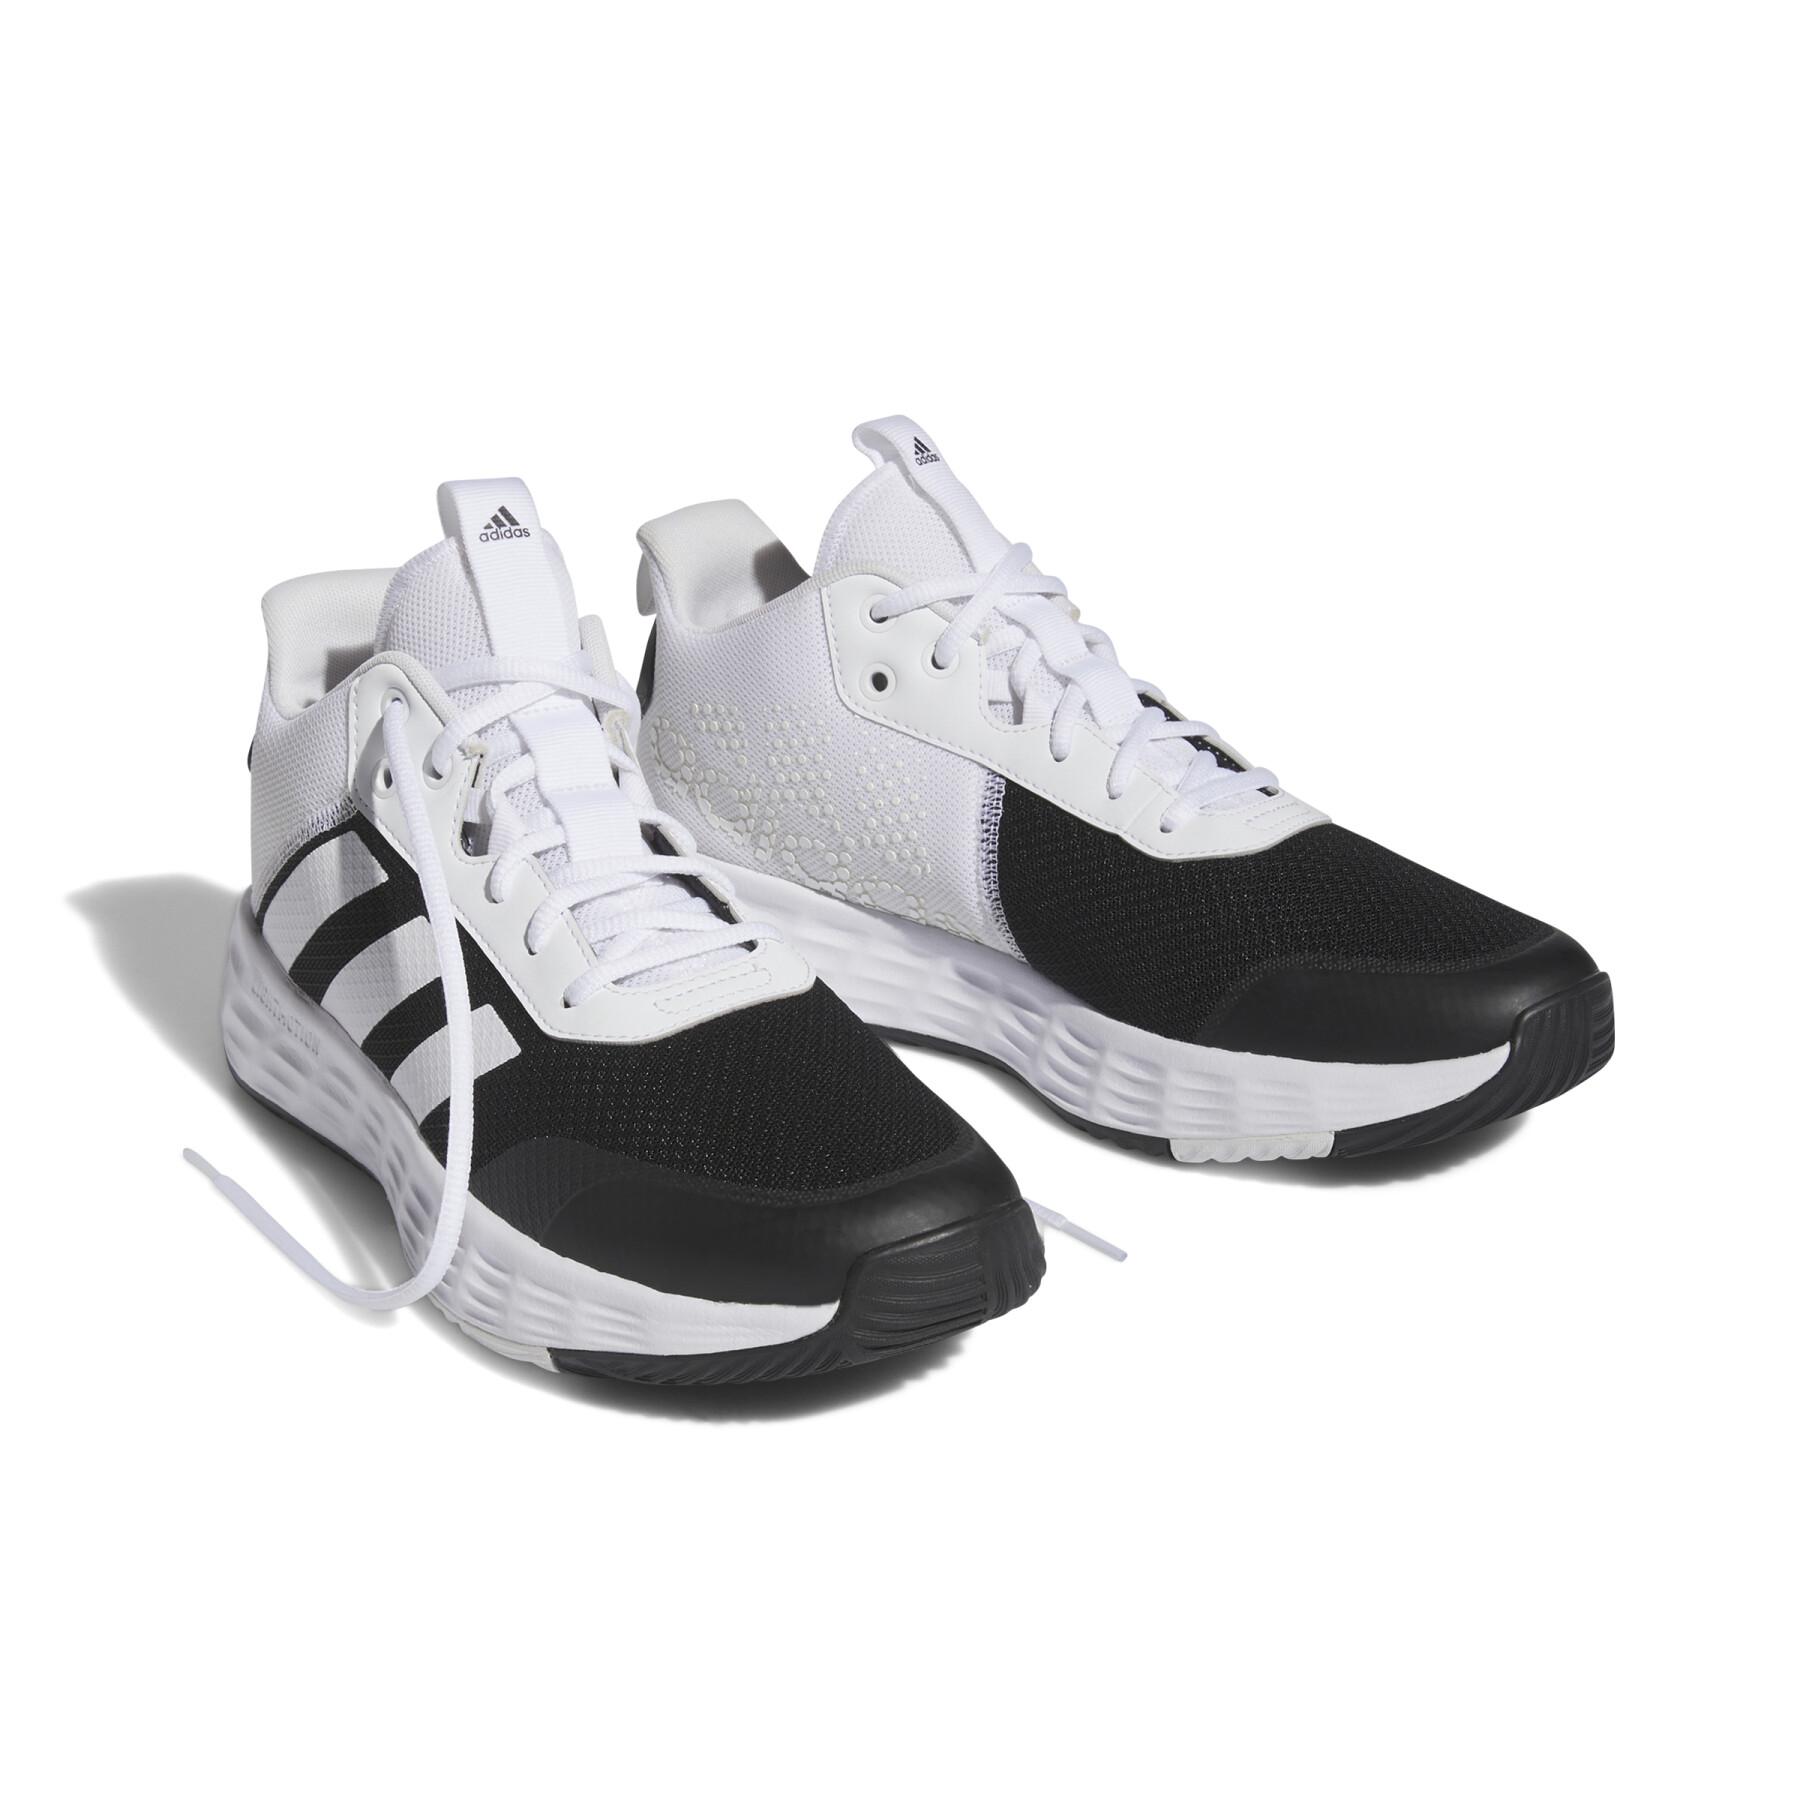 Chaussures indoor adidas Ownthegame 2.0